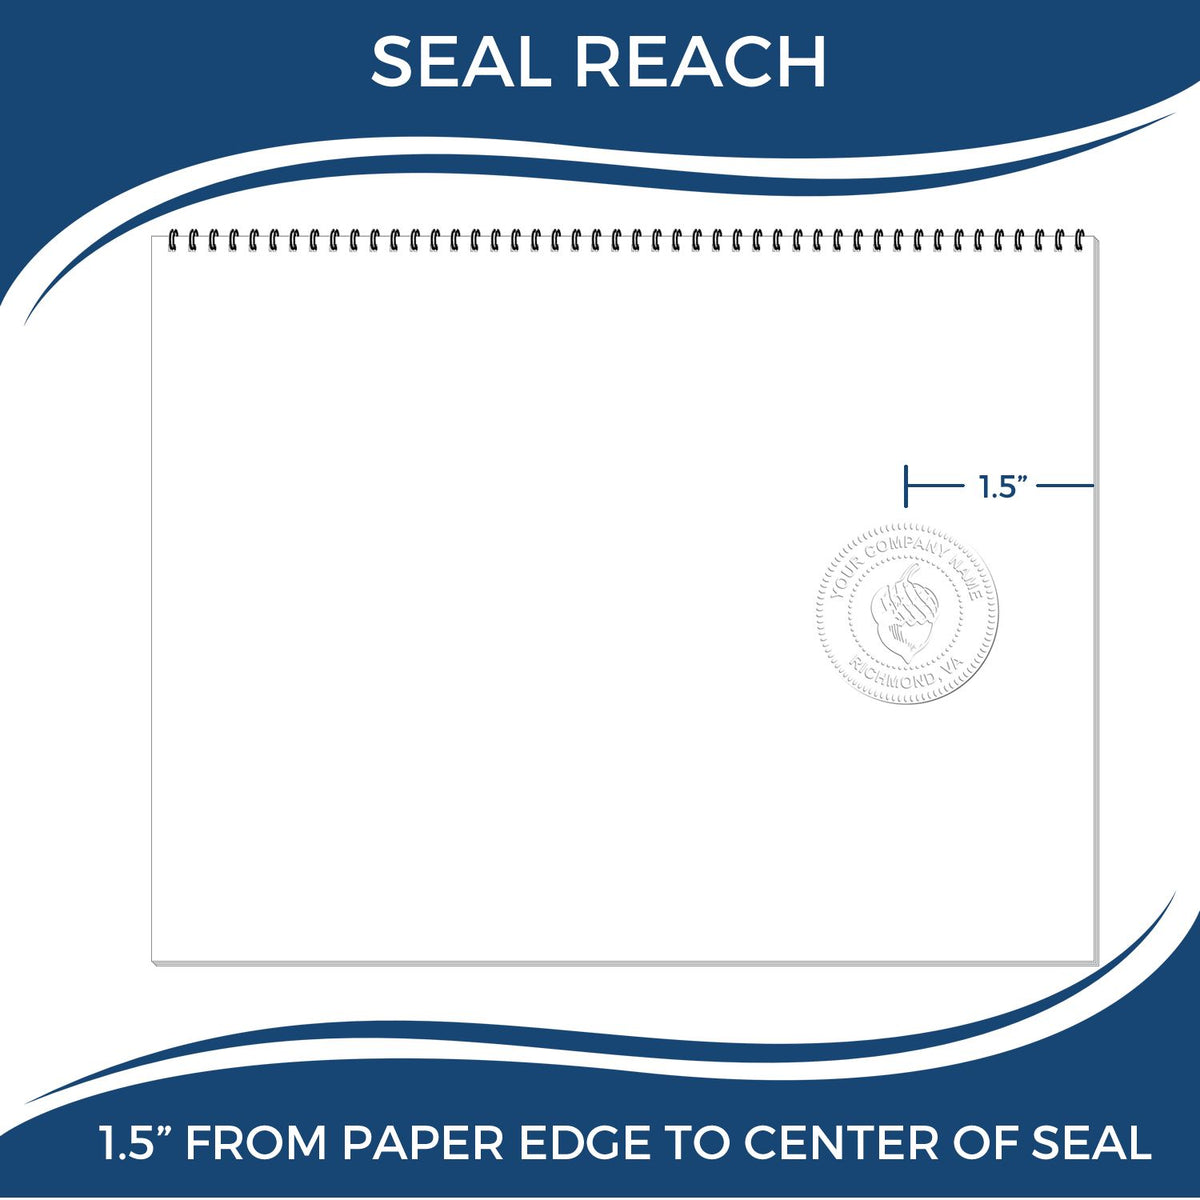 An infographic showing the seal reach which is represented by a ruler and a miniature seal image of the Handheld Nebraska Architect Seal Embosser